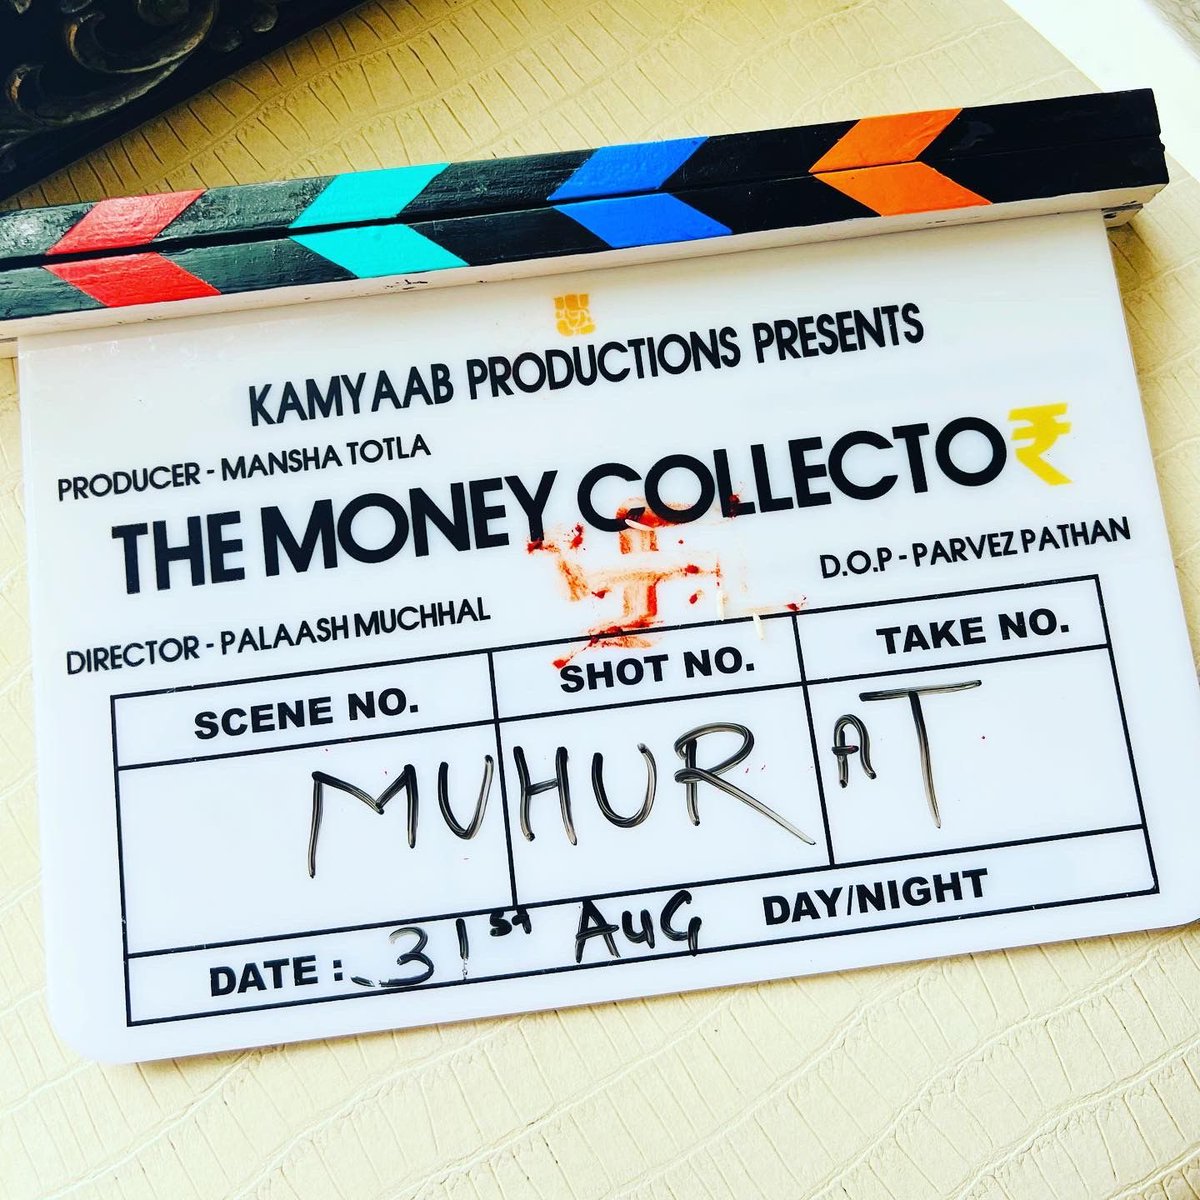 THE MONEY COLLECTOR: PalaashMuchhal’s 2nd film,
produced by MANSHA TOTLA under her new banner, Kamyaab Productions. After success of #Ardh, music composer & director #Palaashmuchhal's 2nd film is #TheMoneyCollector. DOP: #ParvezPathan  
Cinema release in 2022.